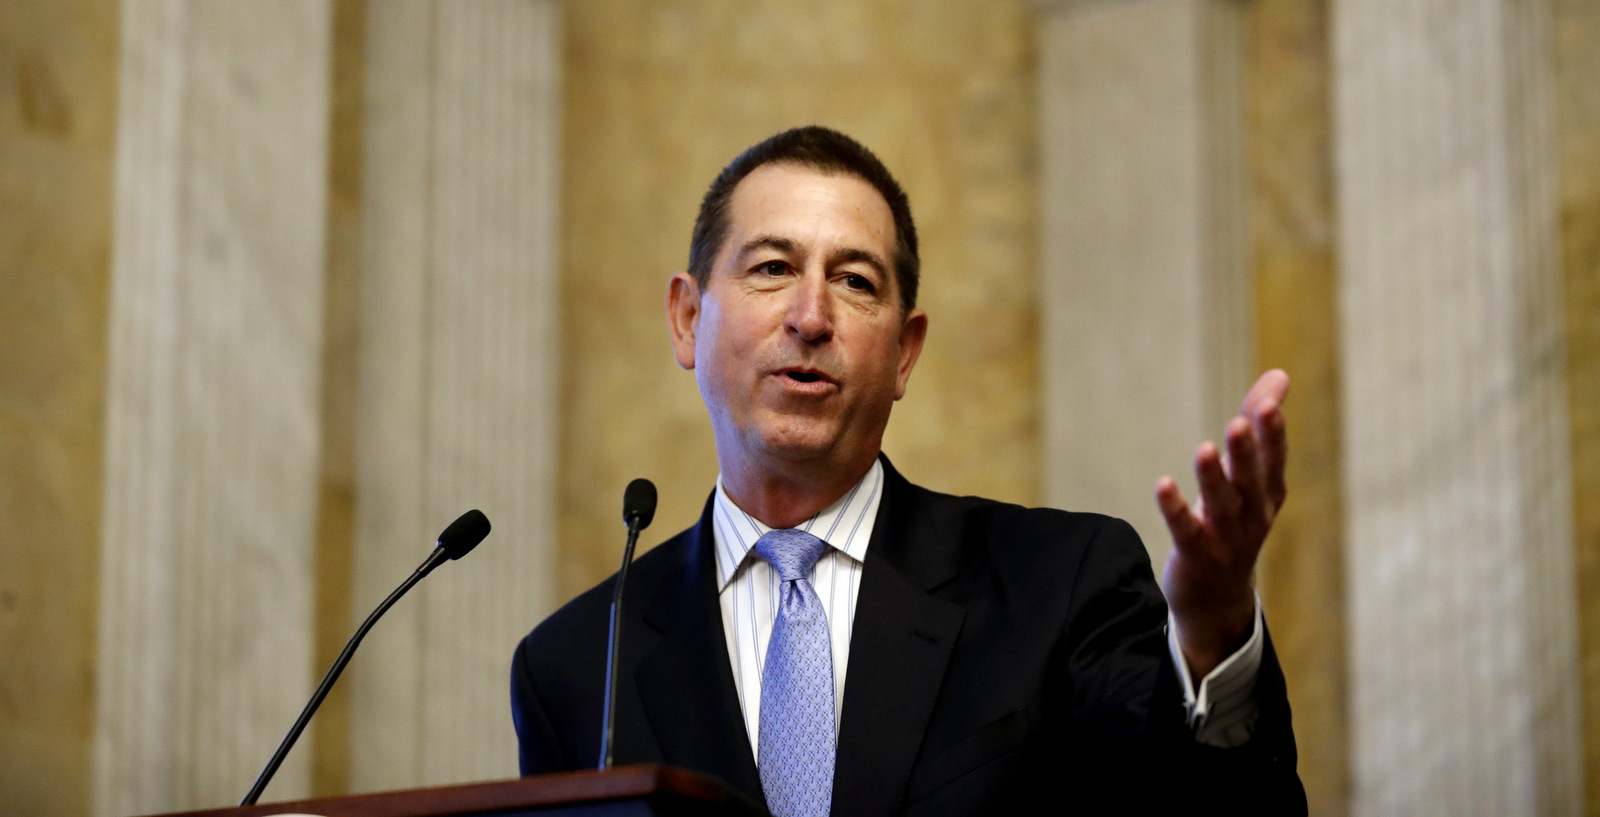 Joseph M. Otting speaks after his swearing in ceremony as Comptroller of the Currency, at the Treasury Department, Nov. 27, 2017 in Washington. (AP/Alex Brandon)